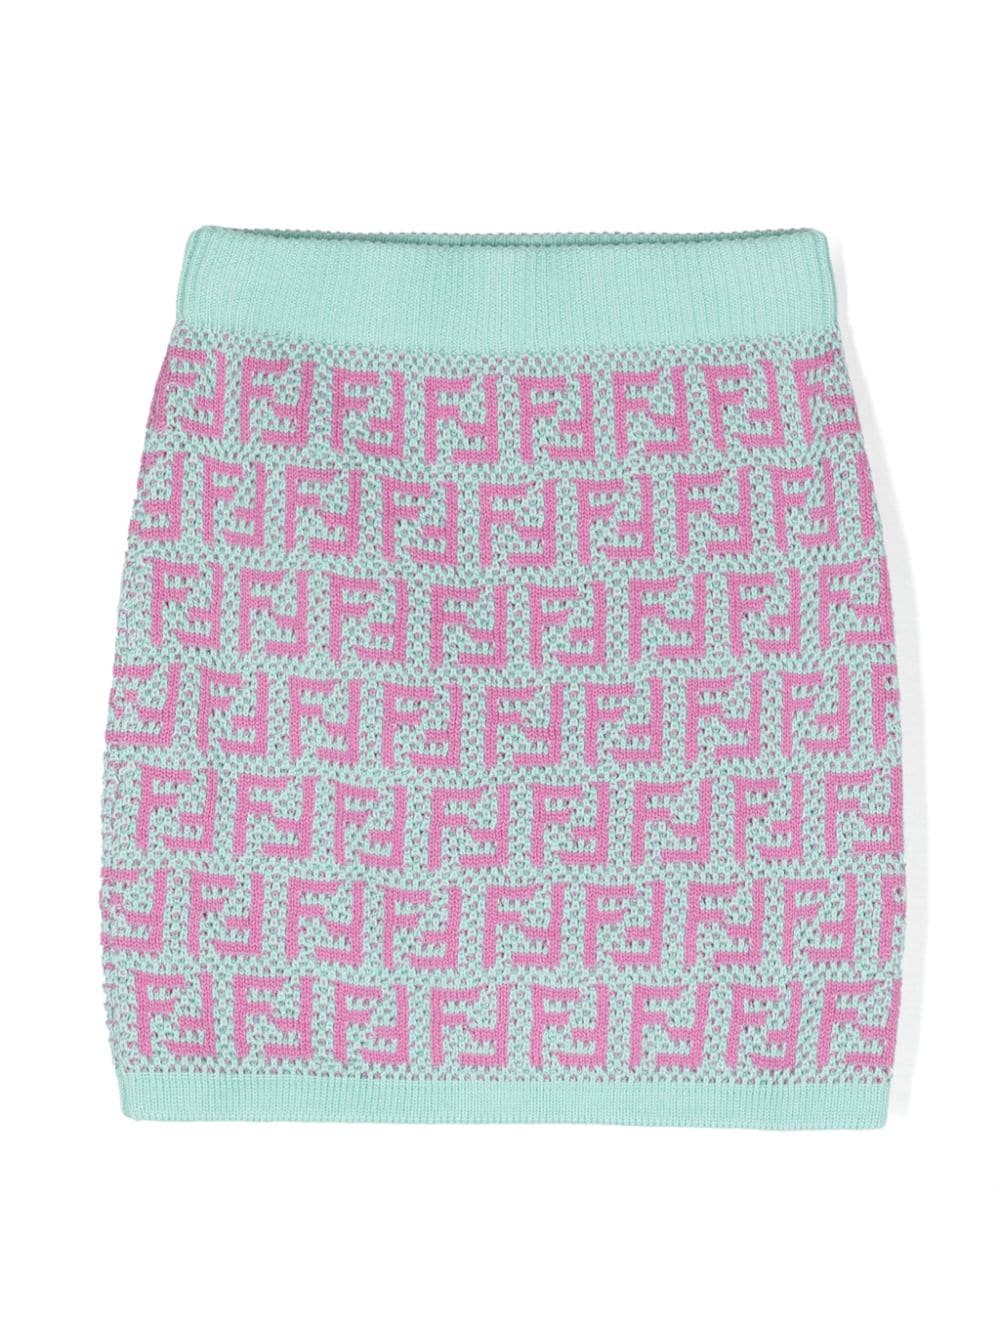 Green and pink skirt for girls